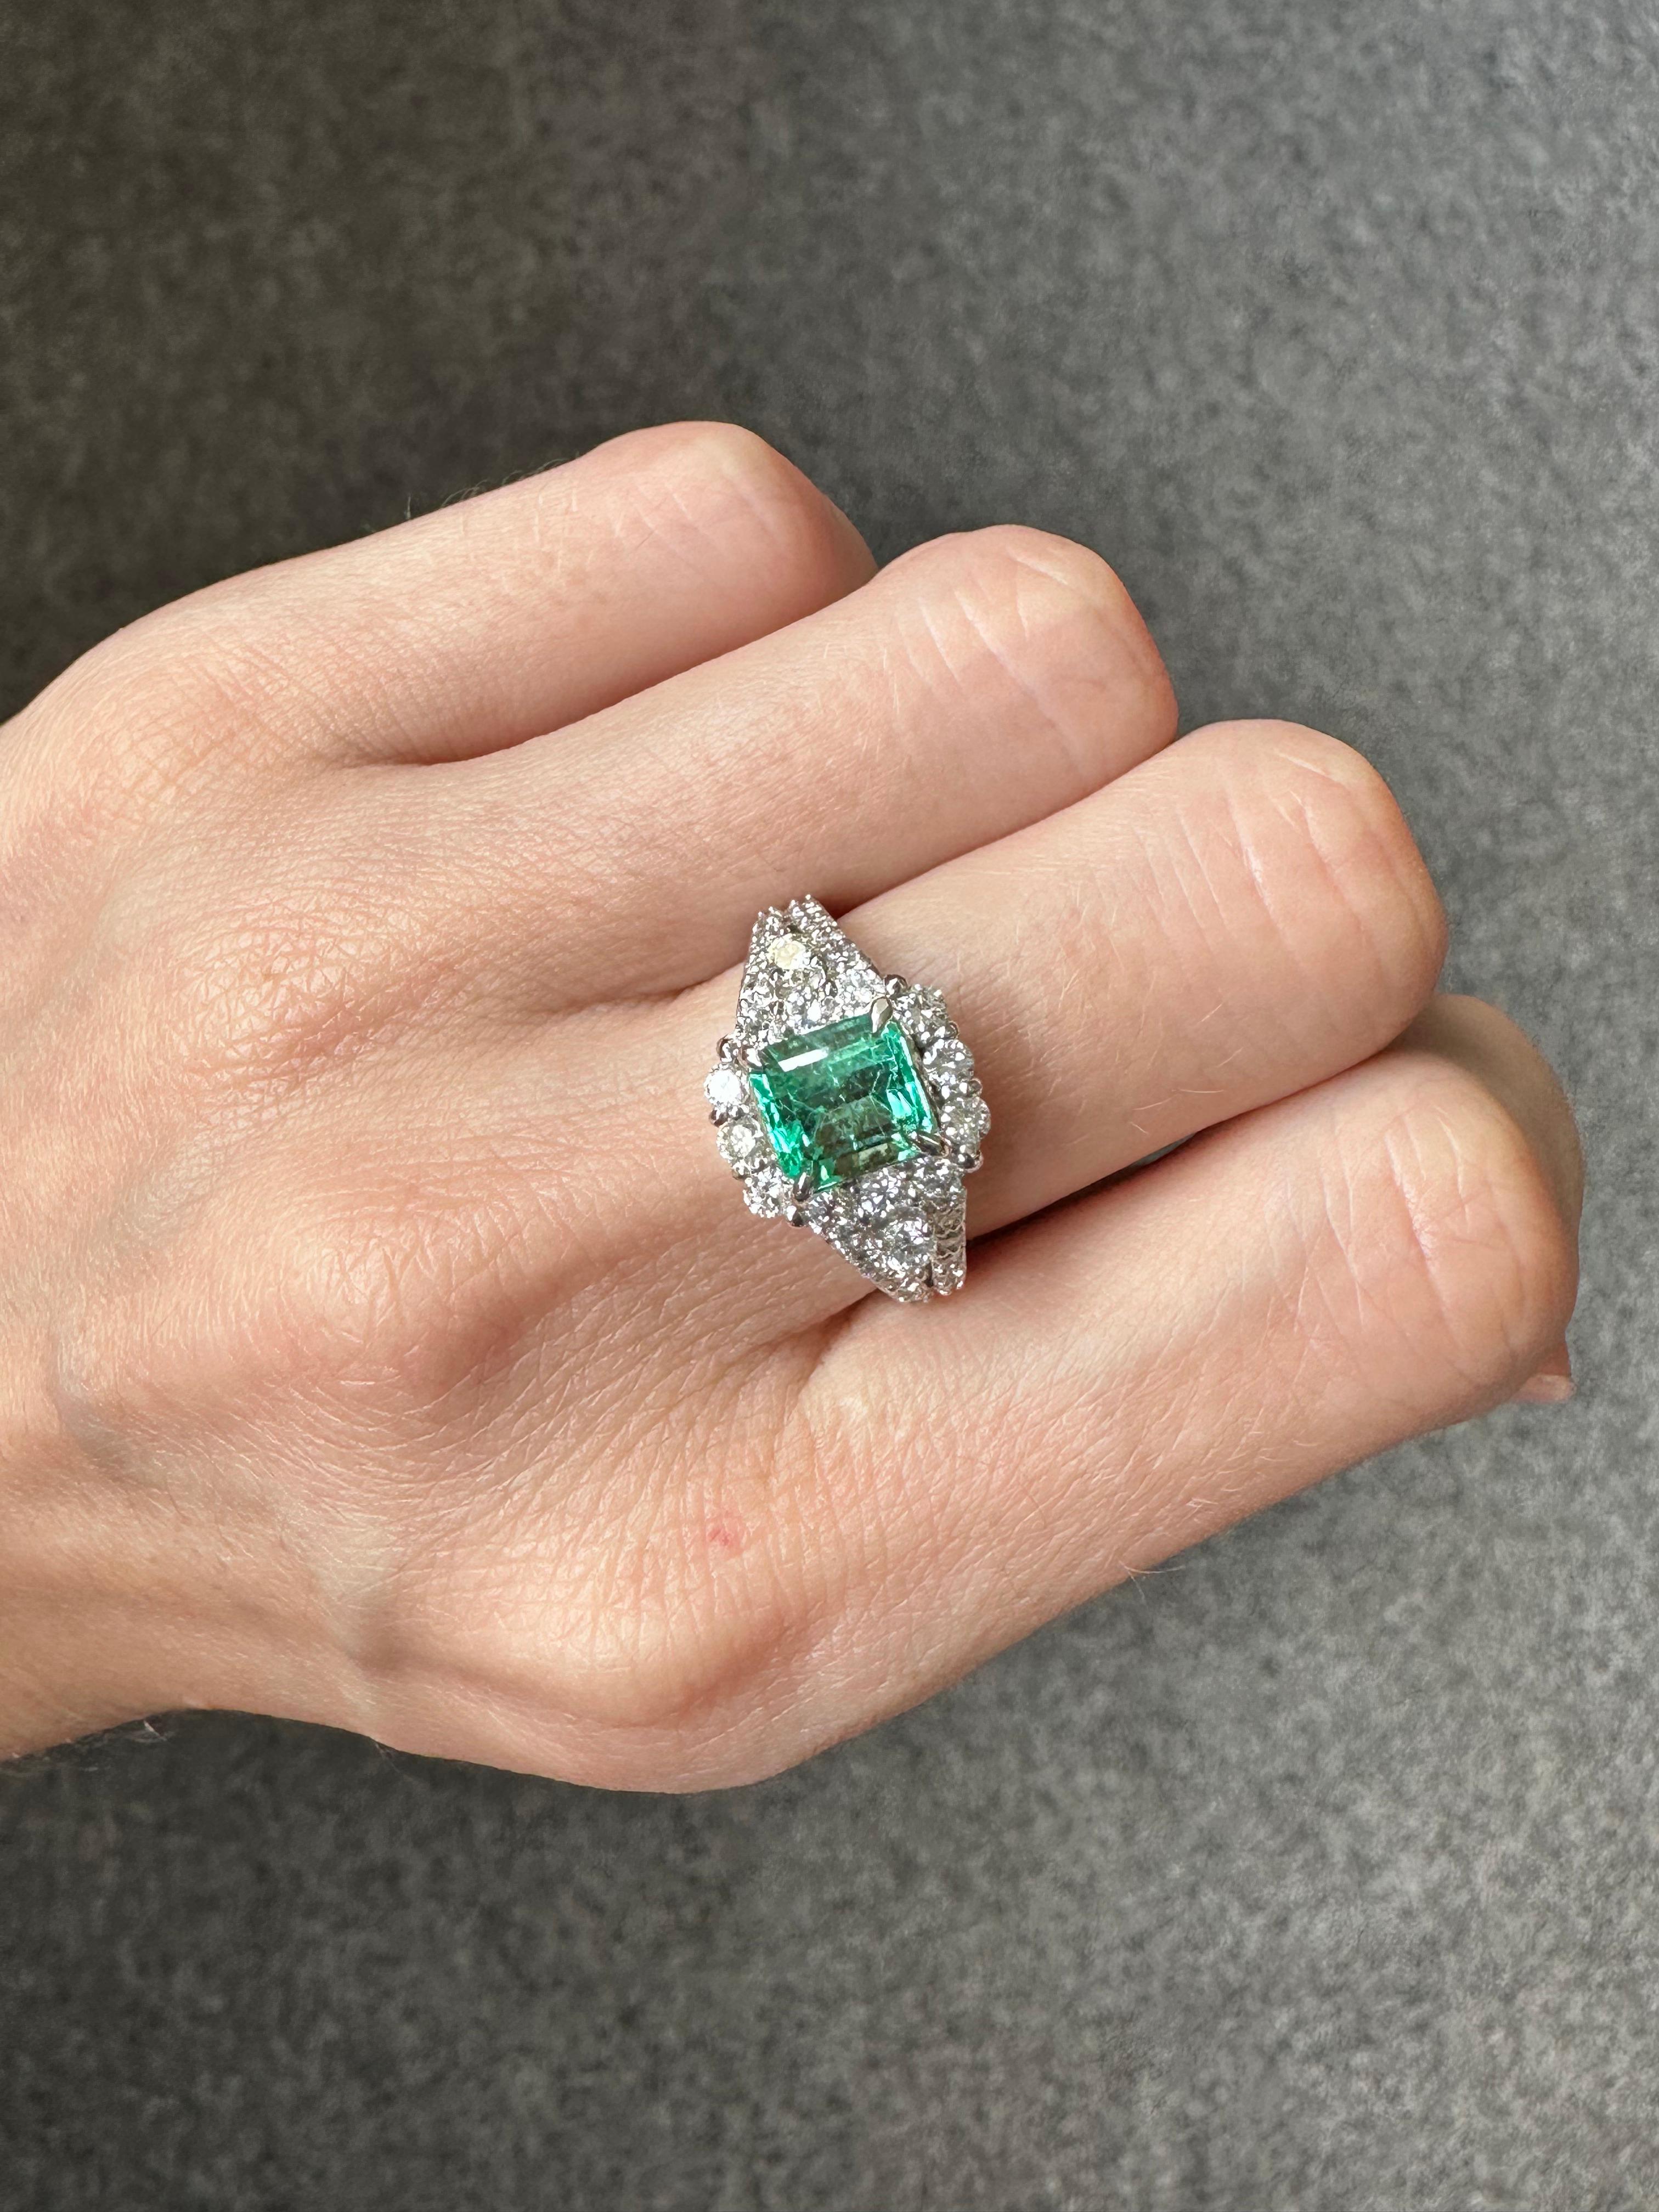 A classic 1.53 carat Colombian Emerald and 0.95 carat engagement ring in Platinum. The center stone is absolutely transparent with a beautiful aqua-teal color. The ring is sized currently at US7, can be resized. 
Please feel free to message us for